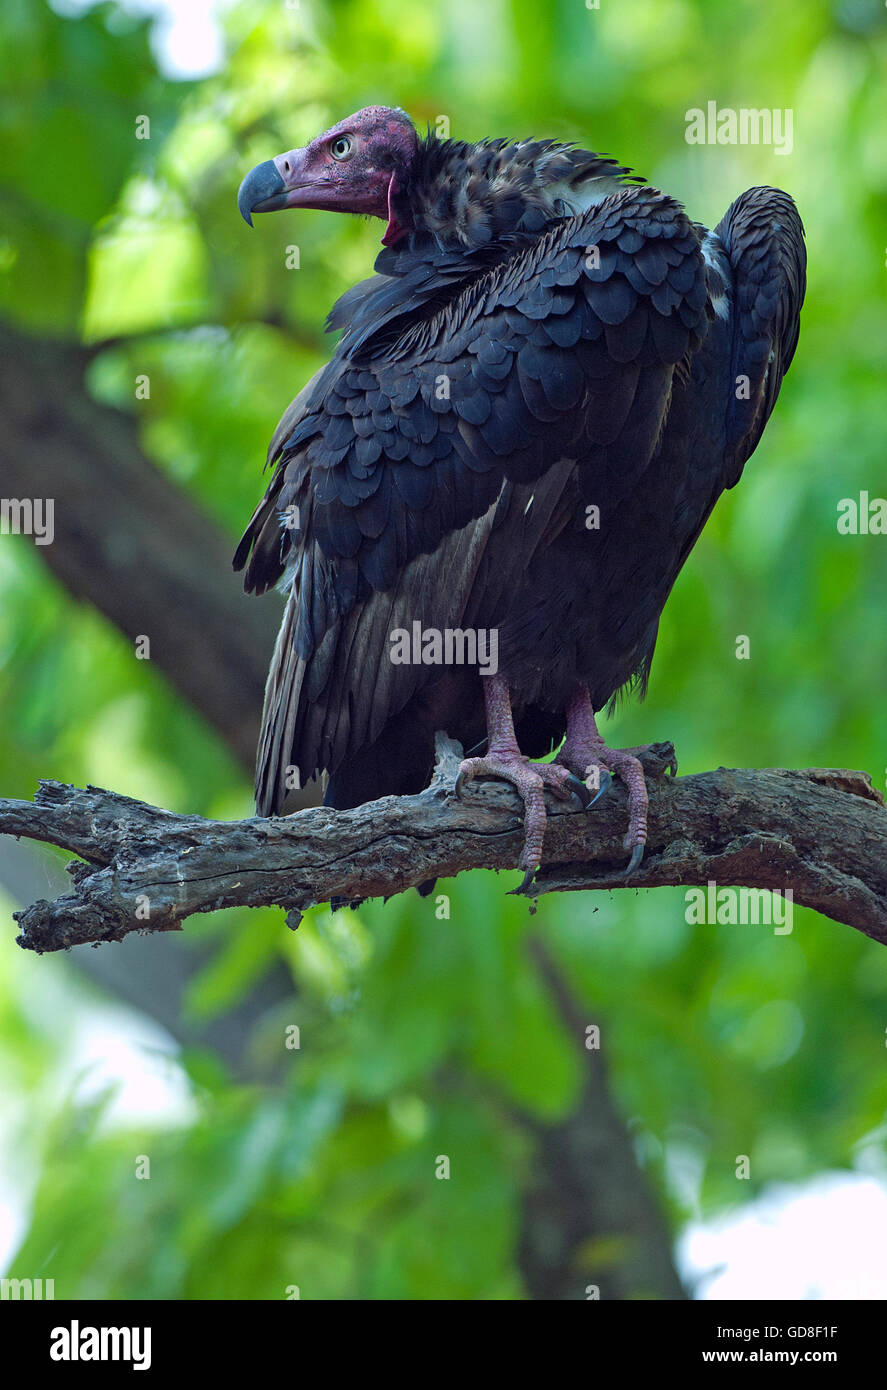 The image of  Red headed vulture ( Sarcogyps calvus ) was taken in Bandavgarh national park, India Stock Photo